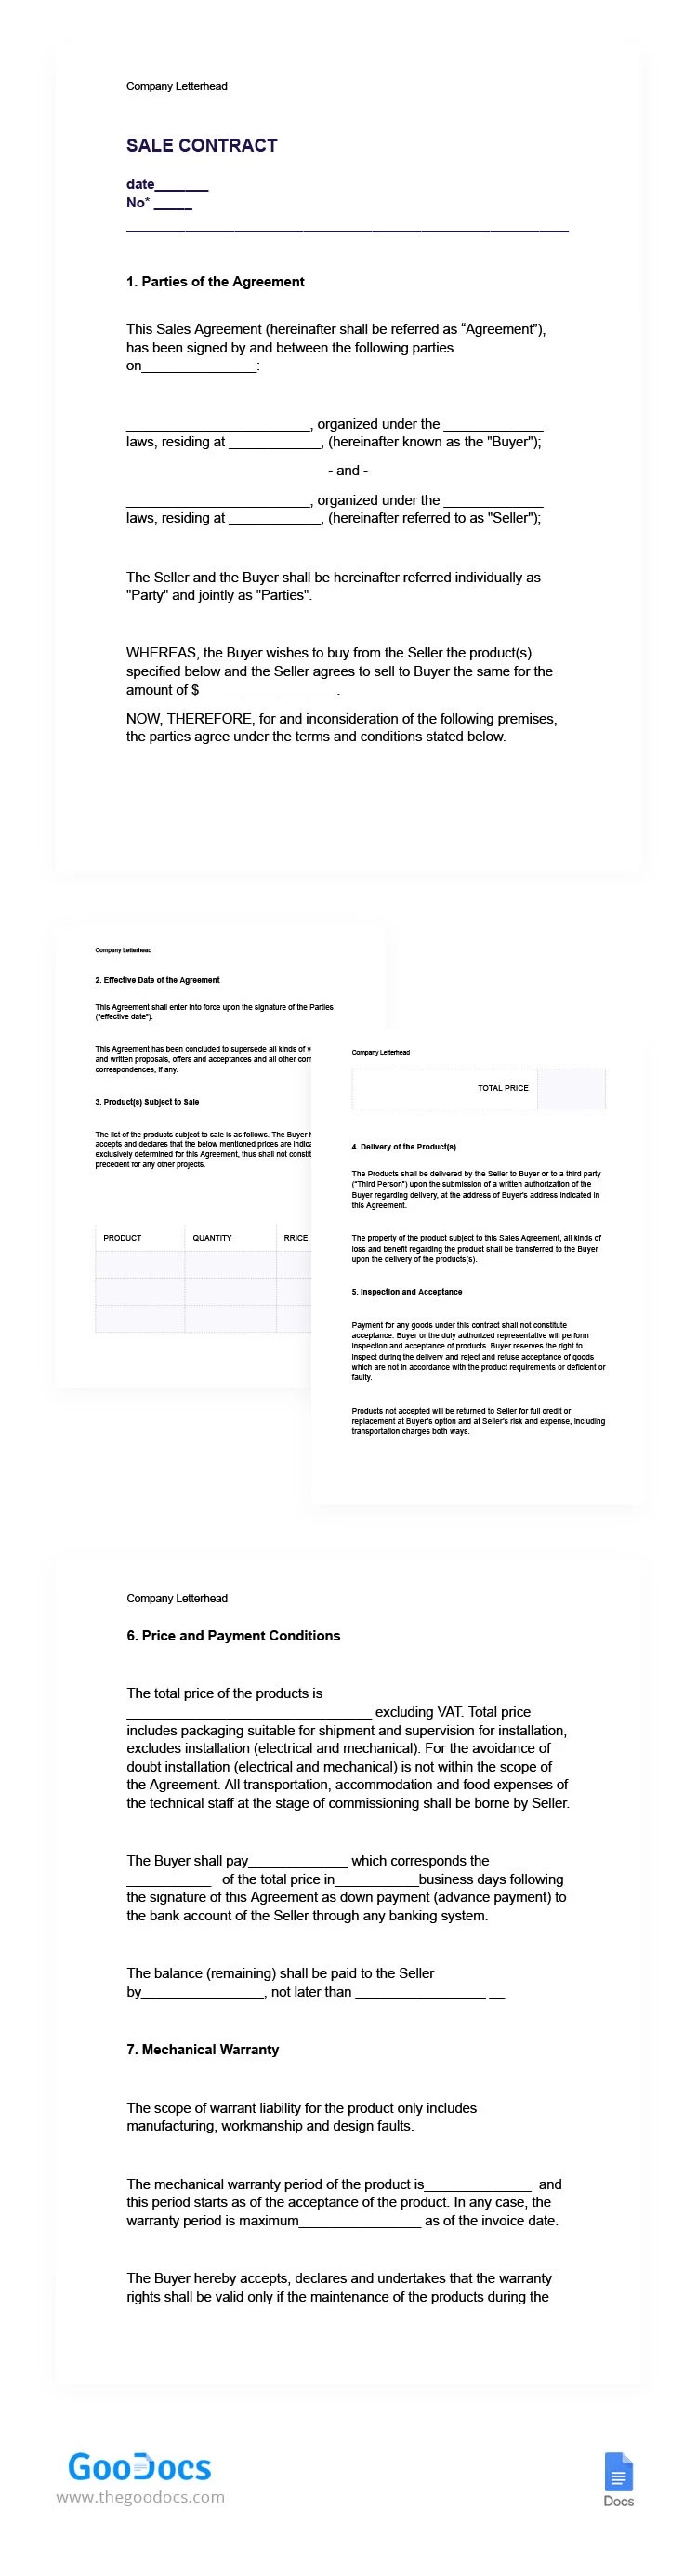 Sale Contract - free Google Docs Template - 10065731